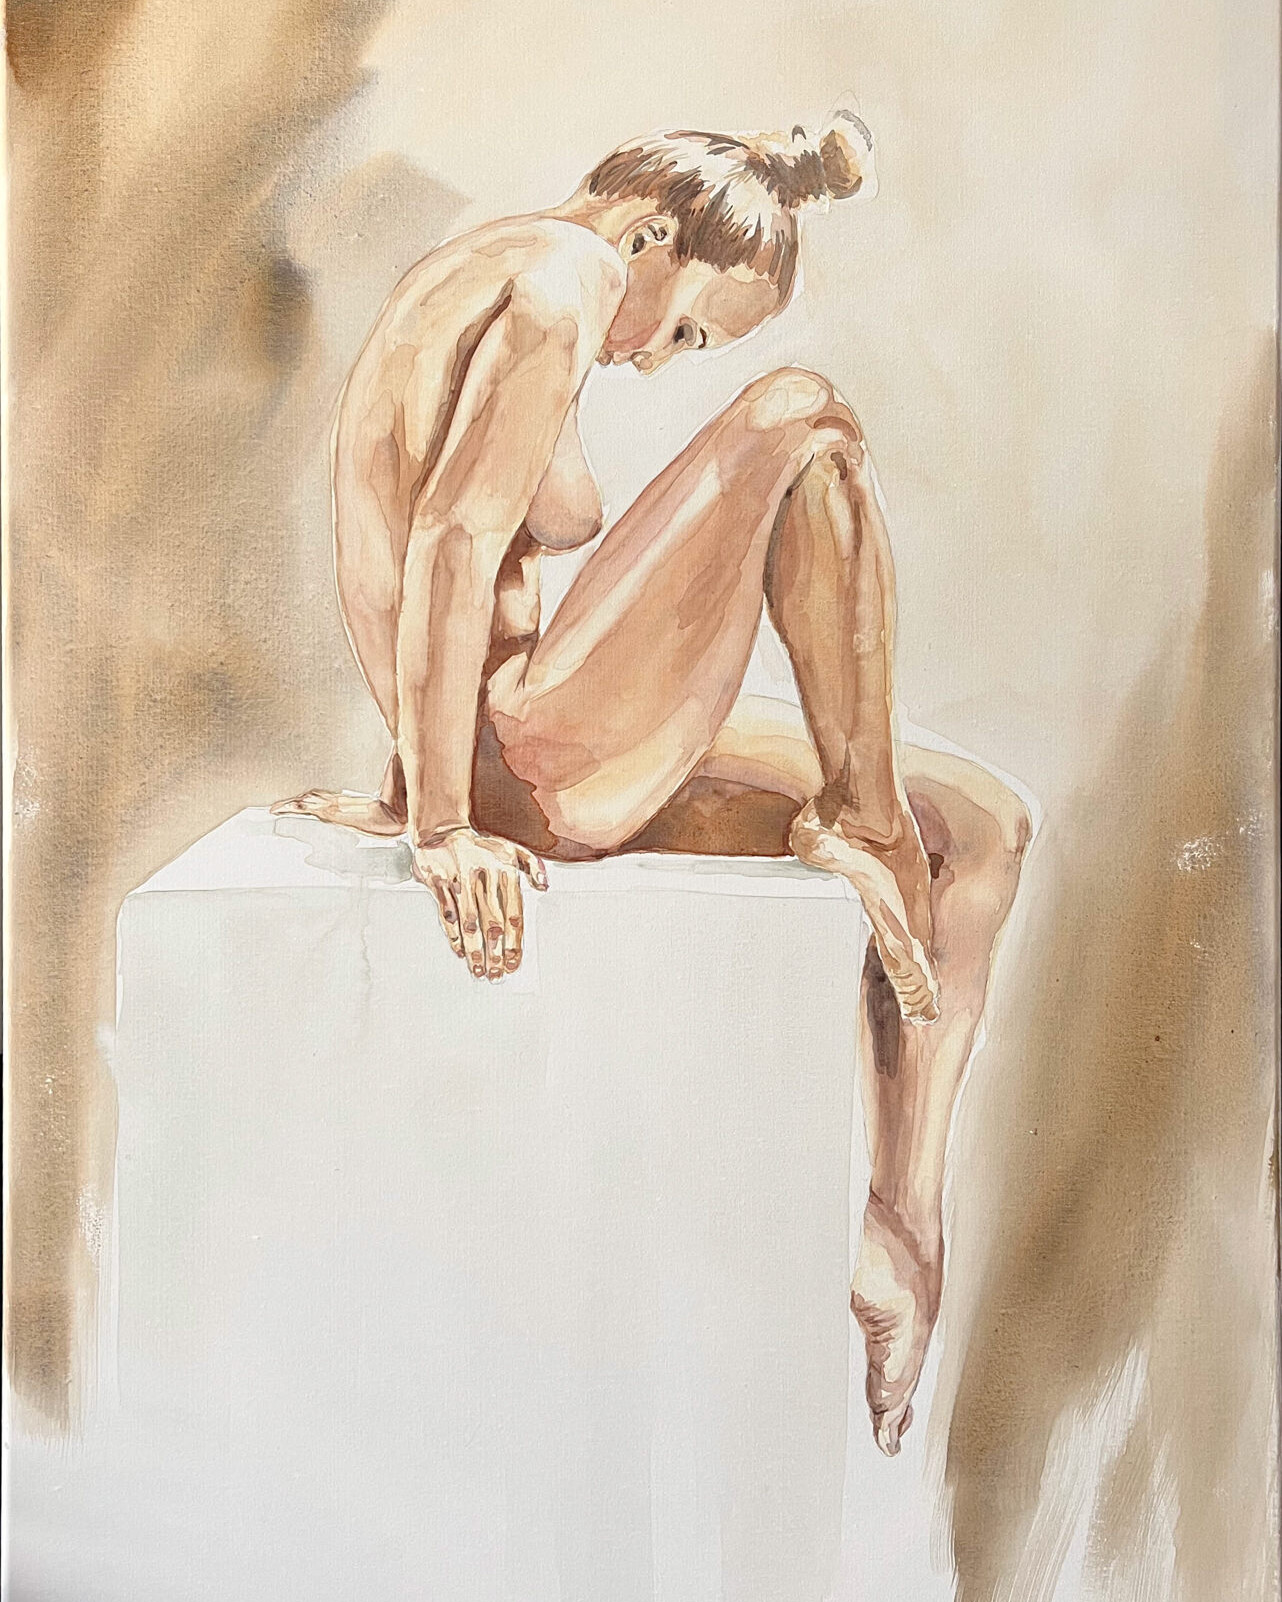 Watercolor painting 'Nude Study' by Alex Righetto, measuring 16 x 24 inches, featuring a serene exploration of the nude human form, part of the Studio Collection.